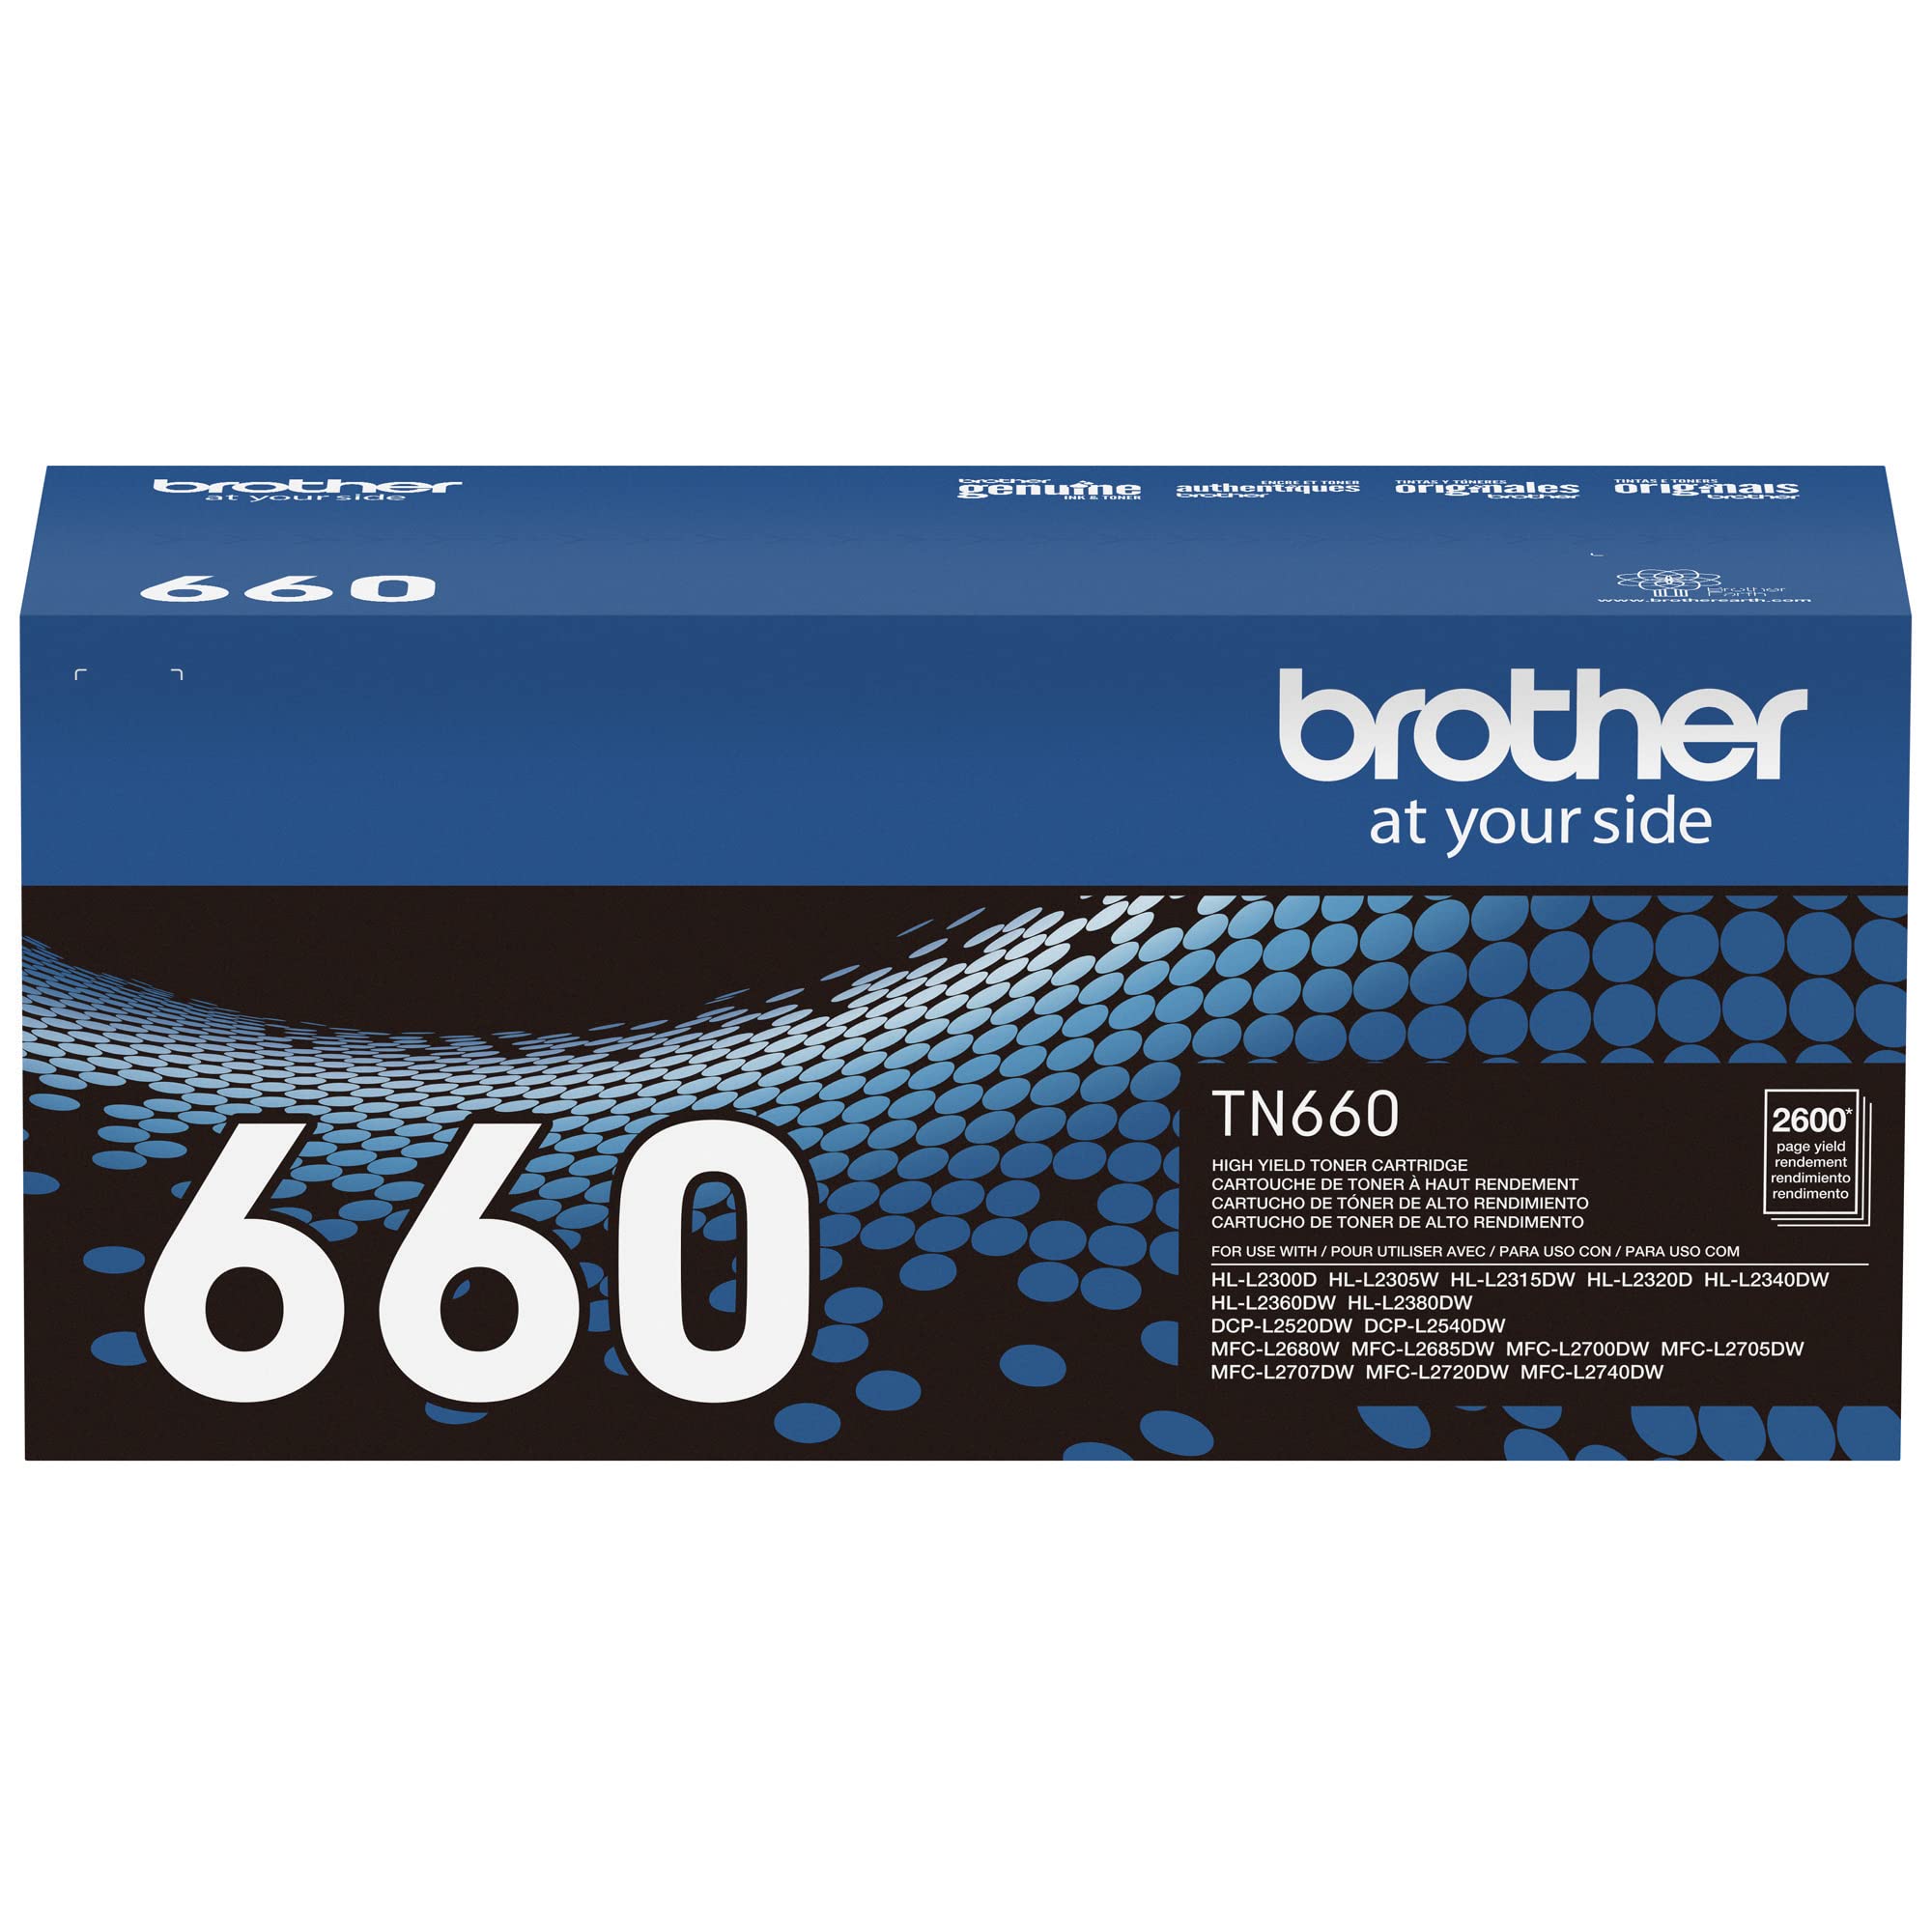 Brother Genuine High Yield Toner Cartridge, TN660, Replacement Black Toner, Page Yield Up to 2,600 Pages, Amazon Dash Replenishment Cartridge